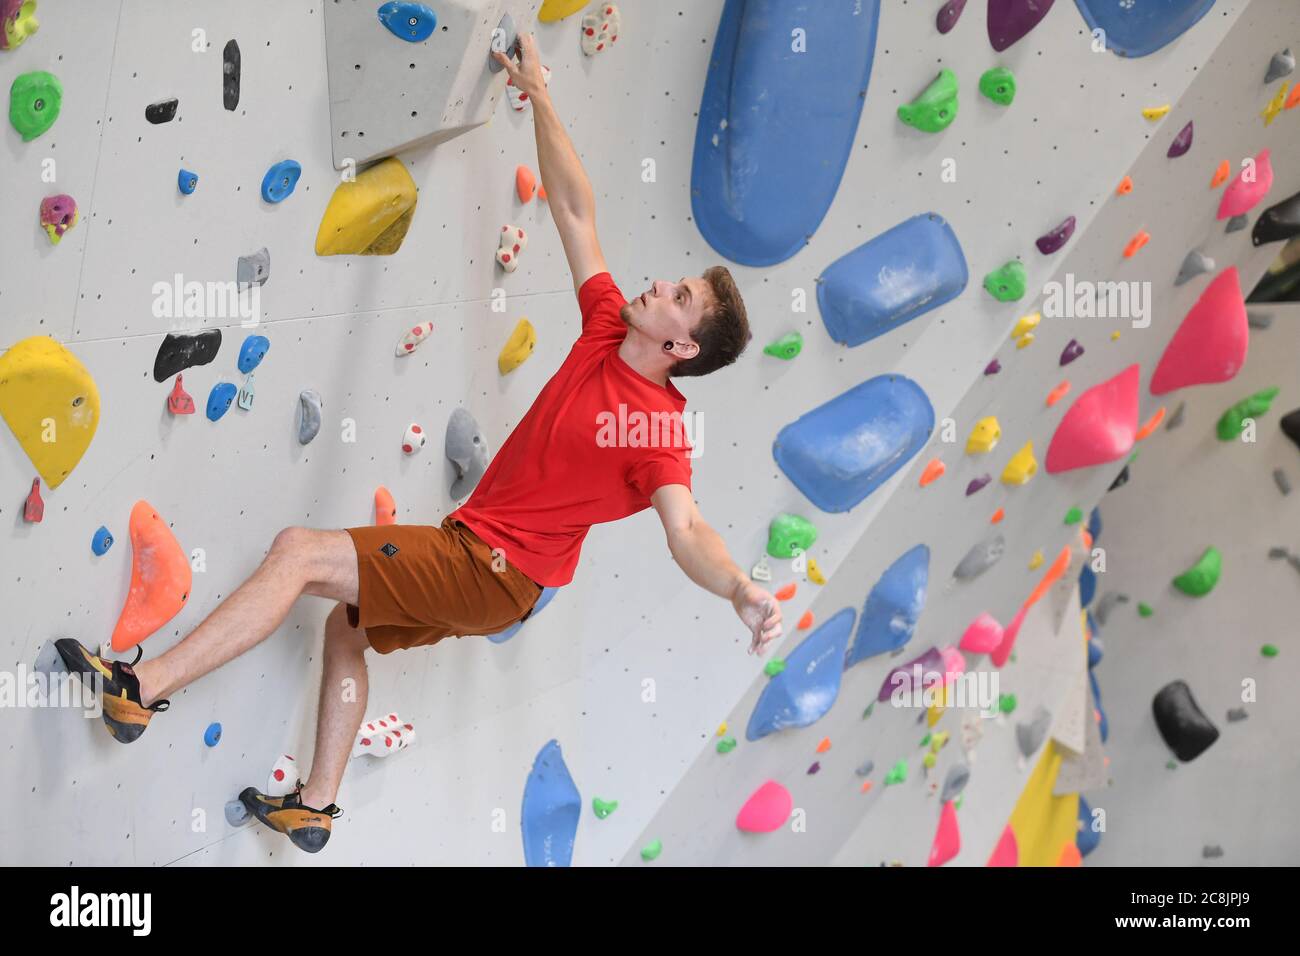 Climbers at The Castle Climbing Centre, near Finsbury Park in north London, as indoor gyms, swimming pools and sports facilities can reopen as part of the latest easing of coronavirus lockdown measures in England. Stock Photo